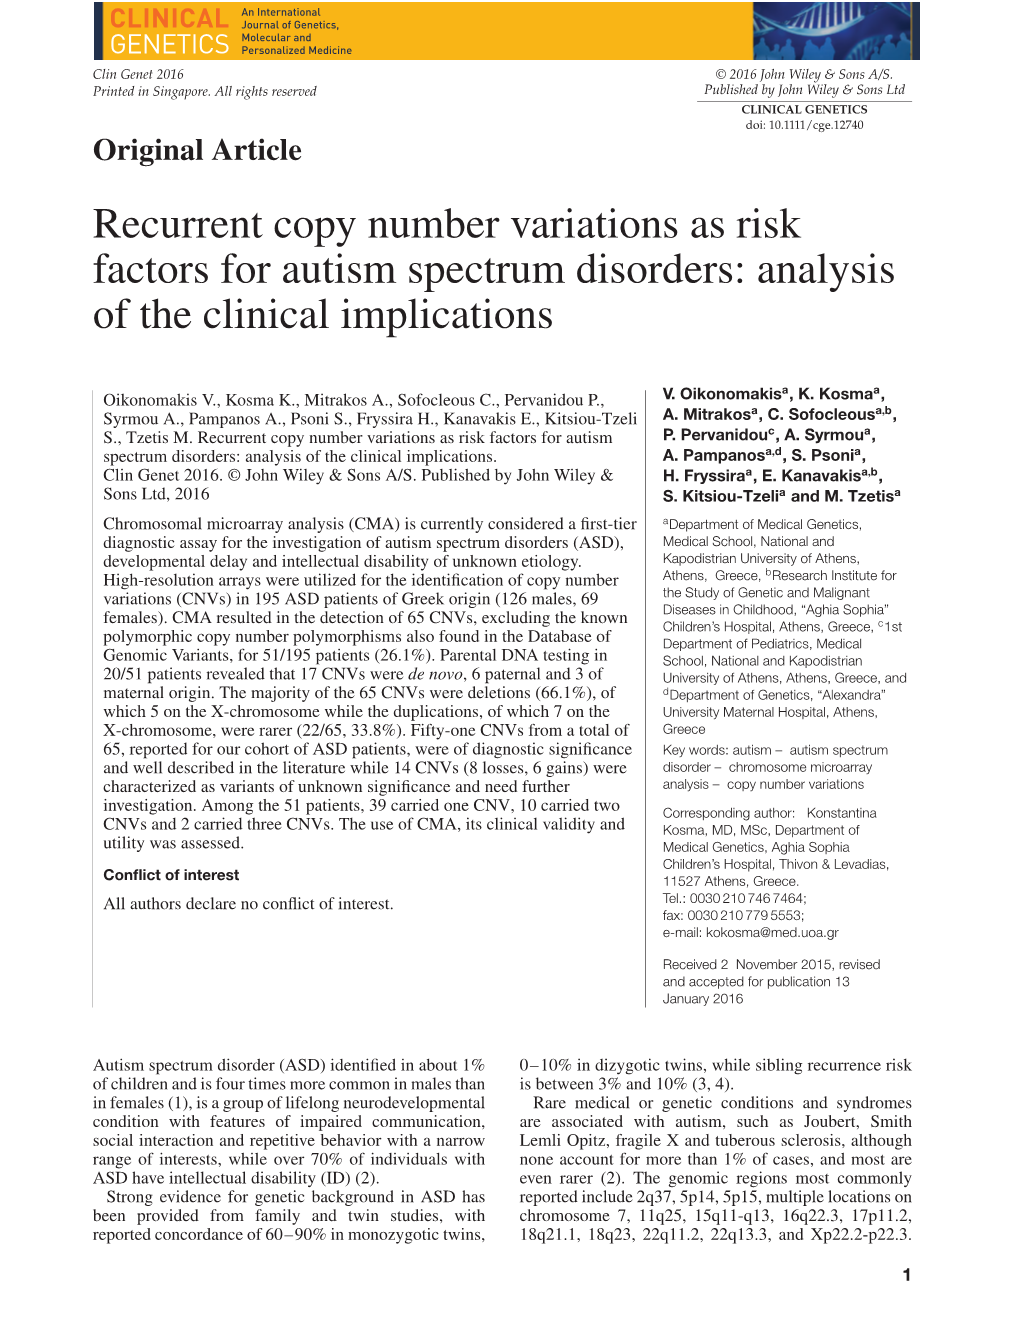 Recurrent Copy Number Variations As Risk Factors for Autism Spectrum Disorders: Analysis of the Clinical Implications